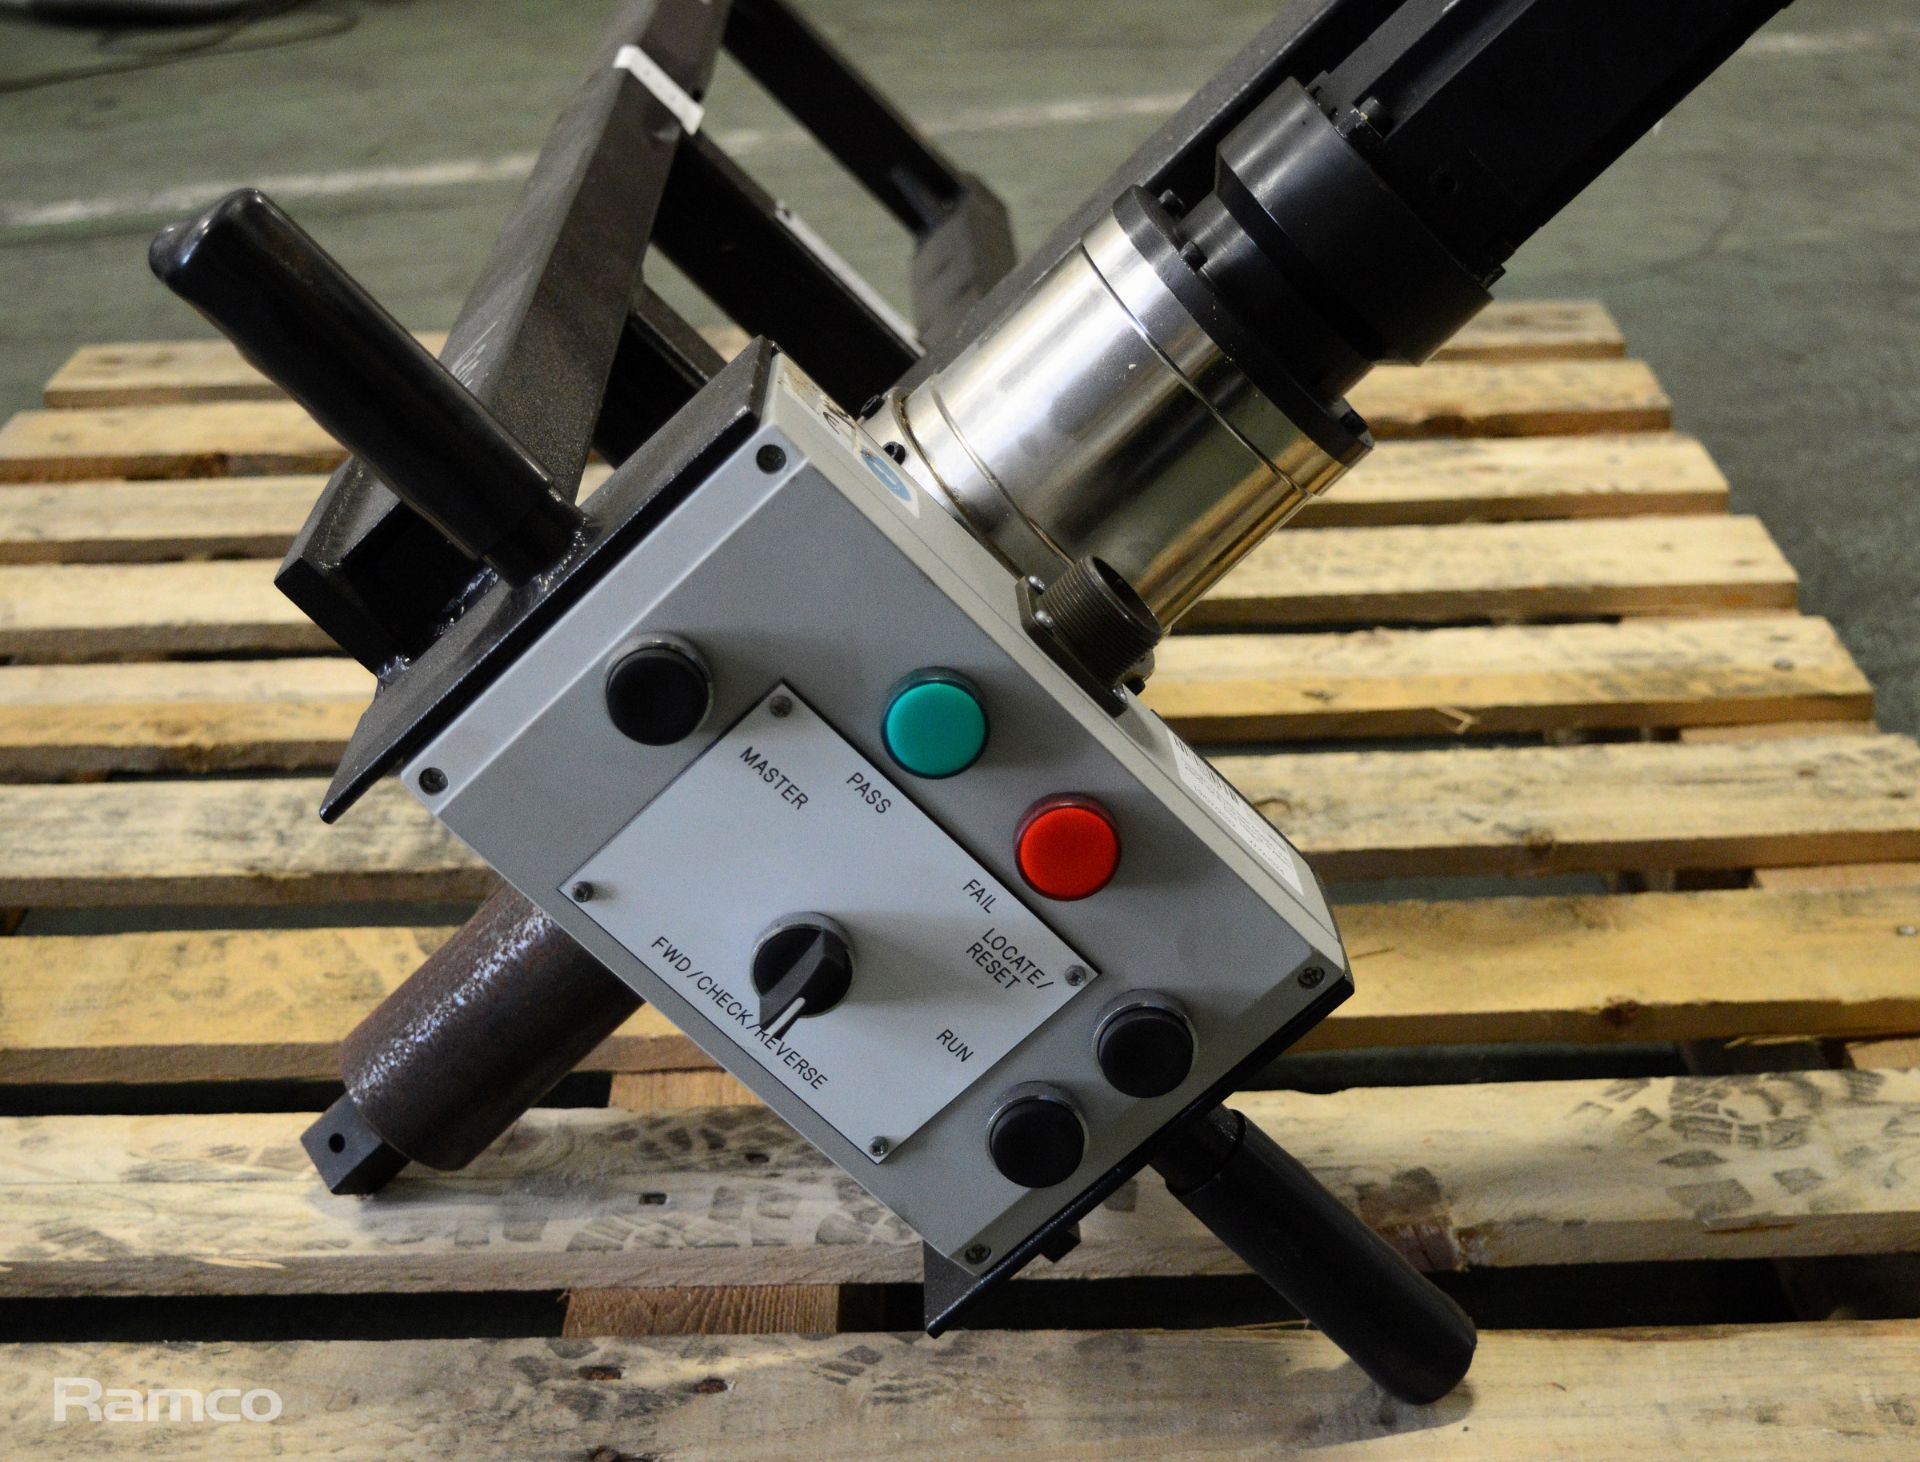 Norbar Transducer 50650.IND 2500 lbf.ft Lid Bolting System Tool Head - Image 8 of 12